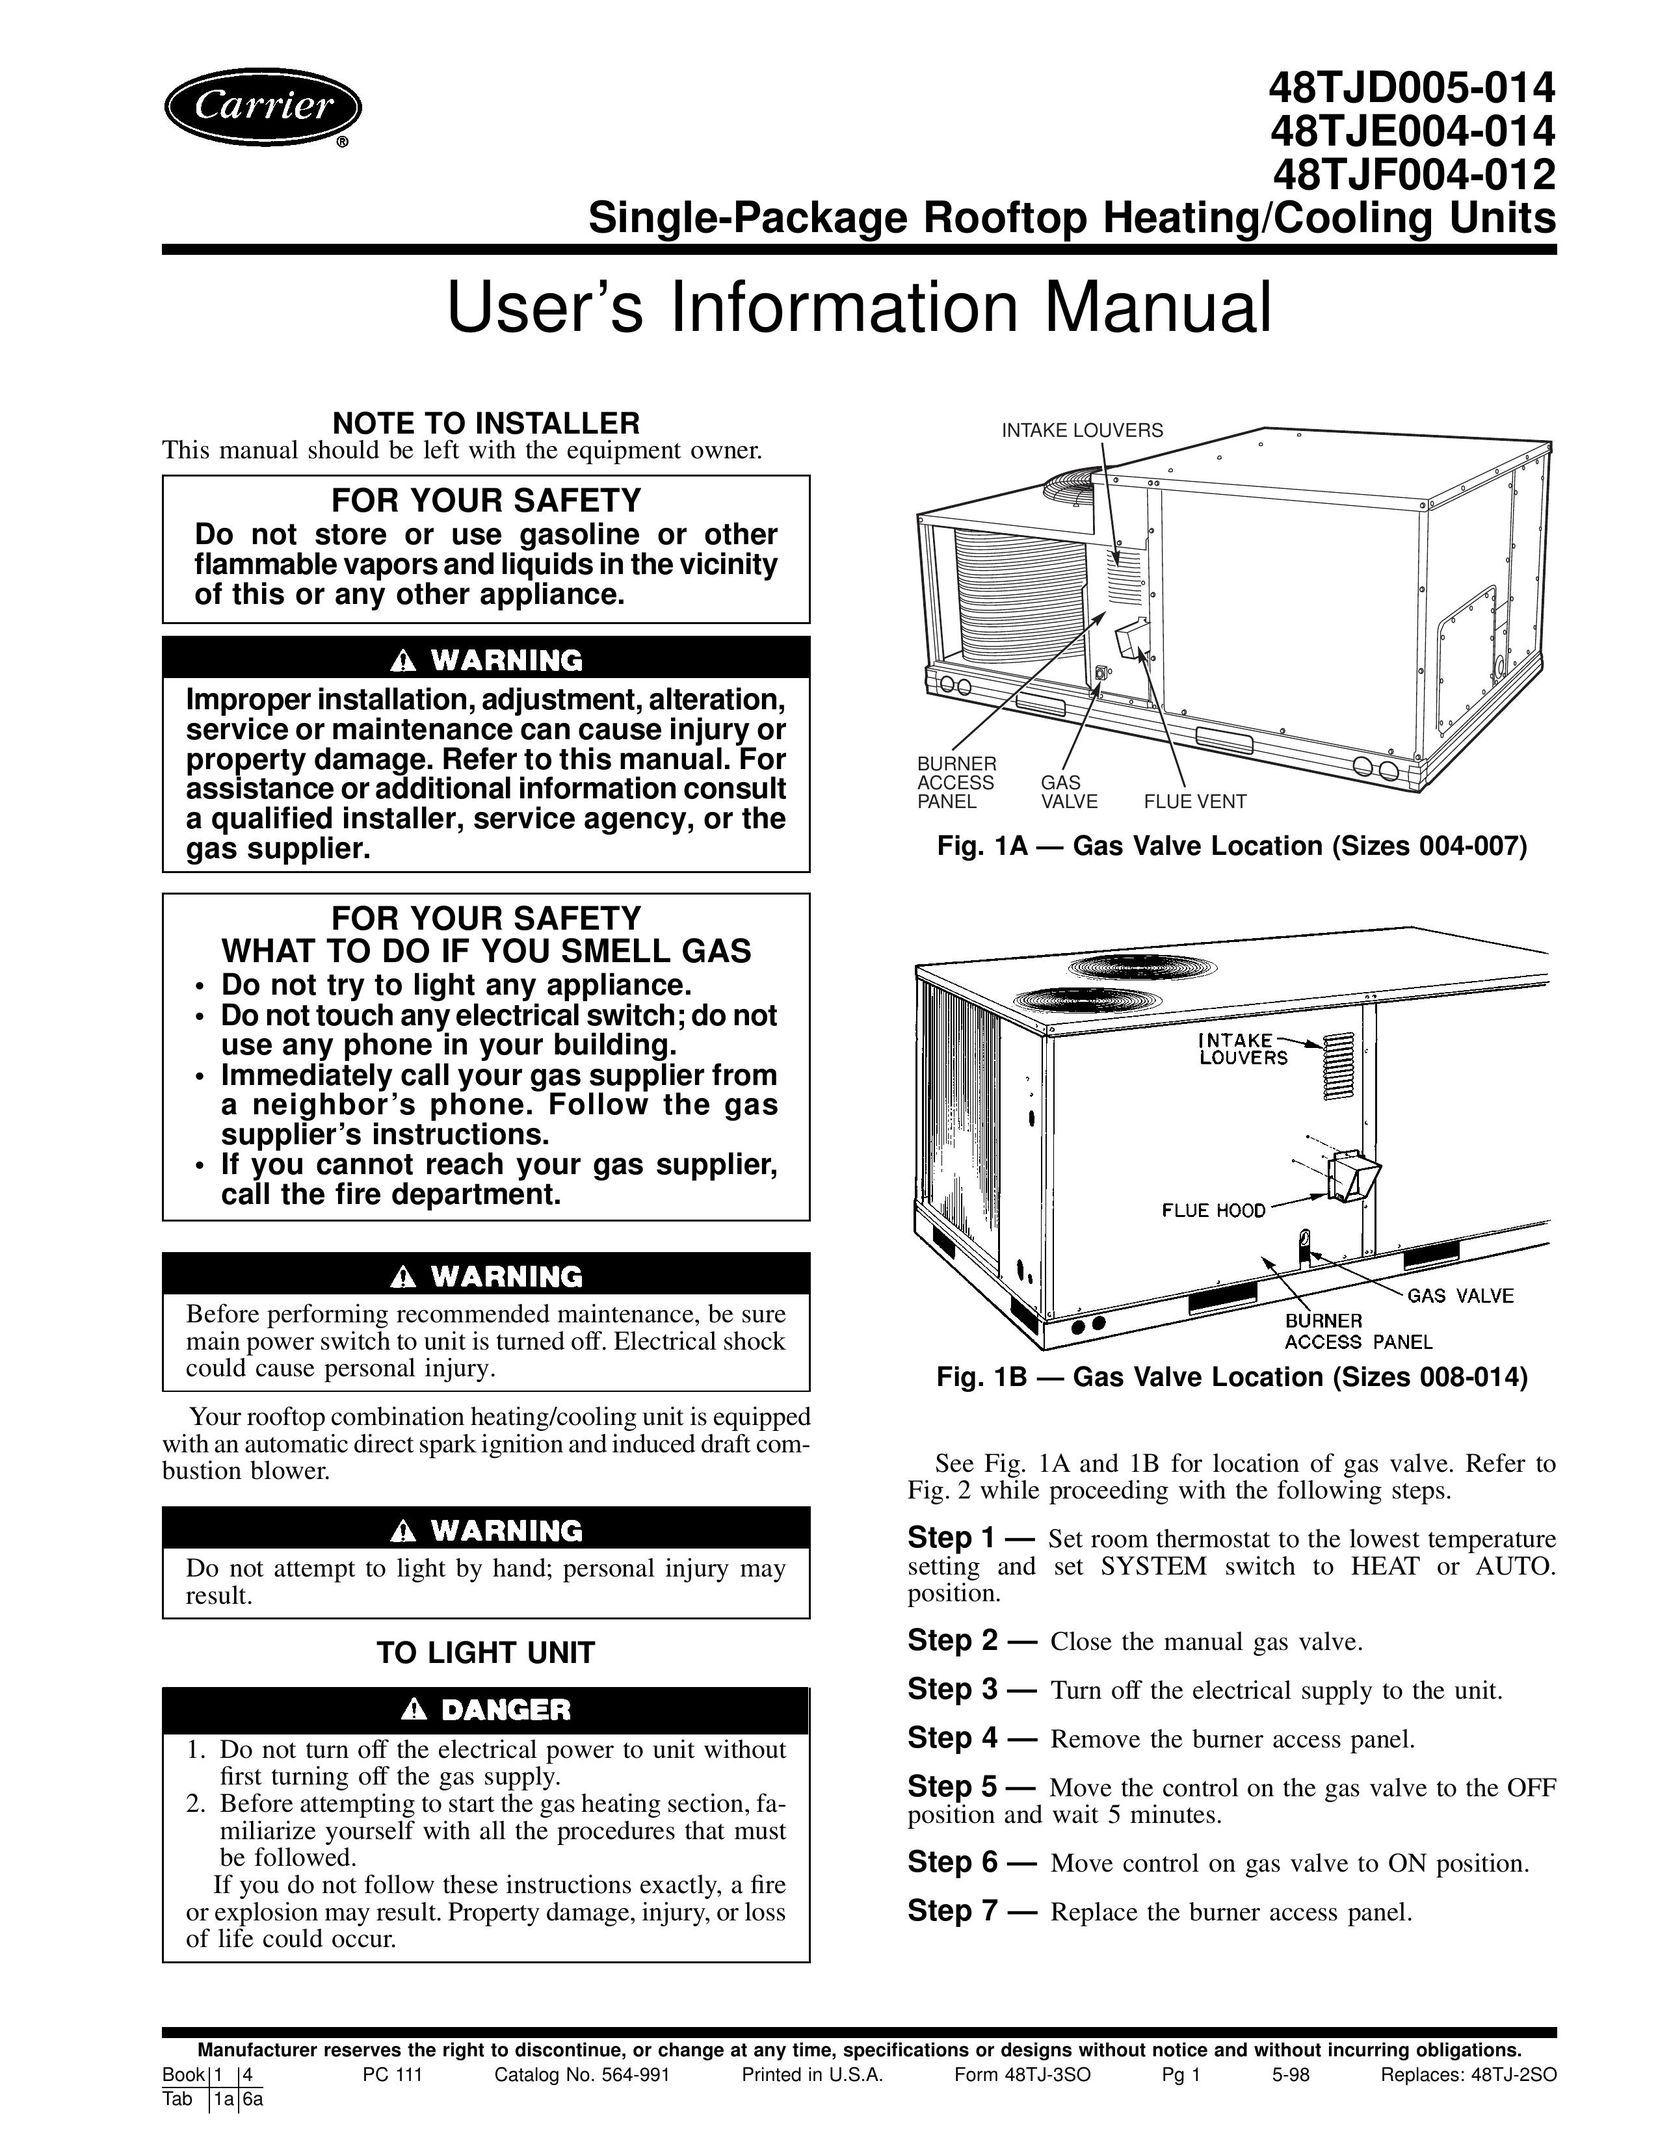 Carrier 48TJF004-012 Heating System User Manual